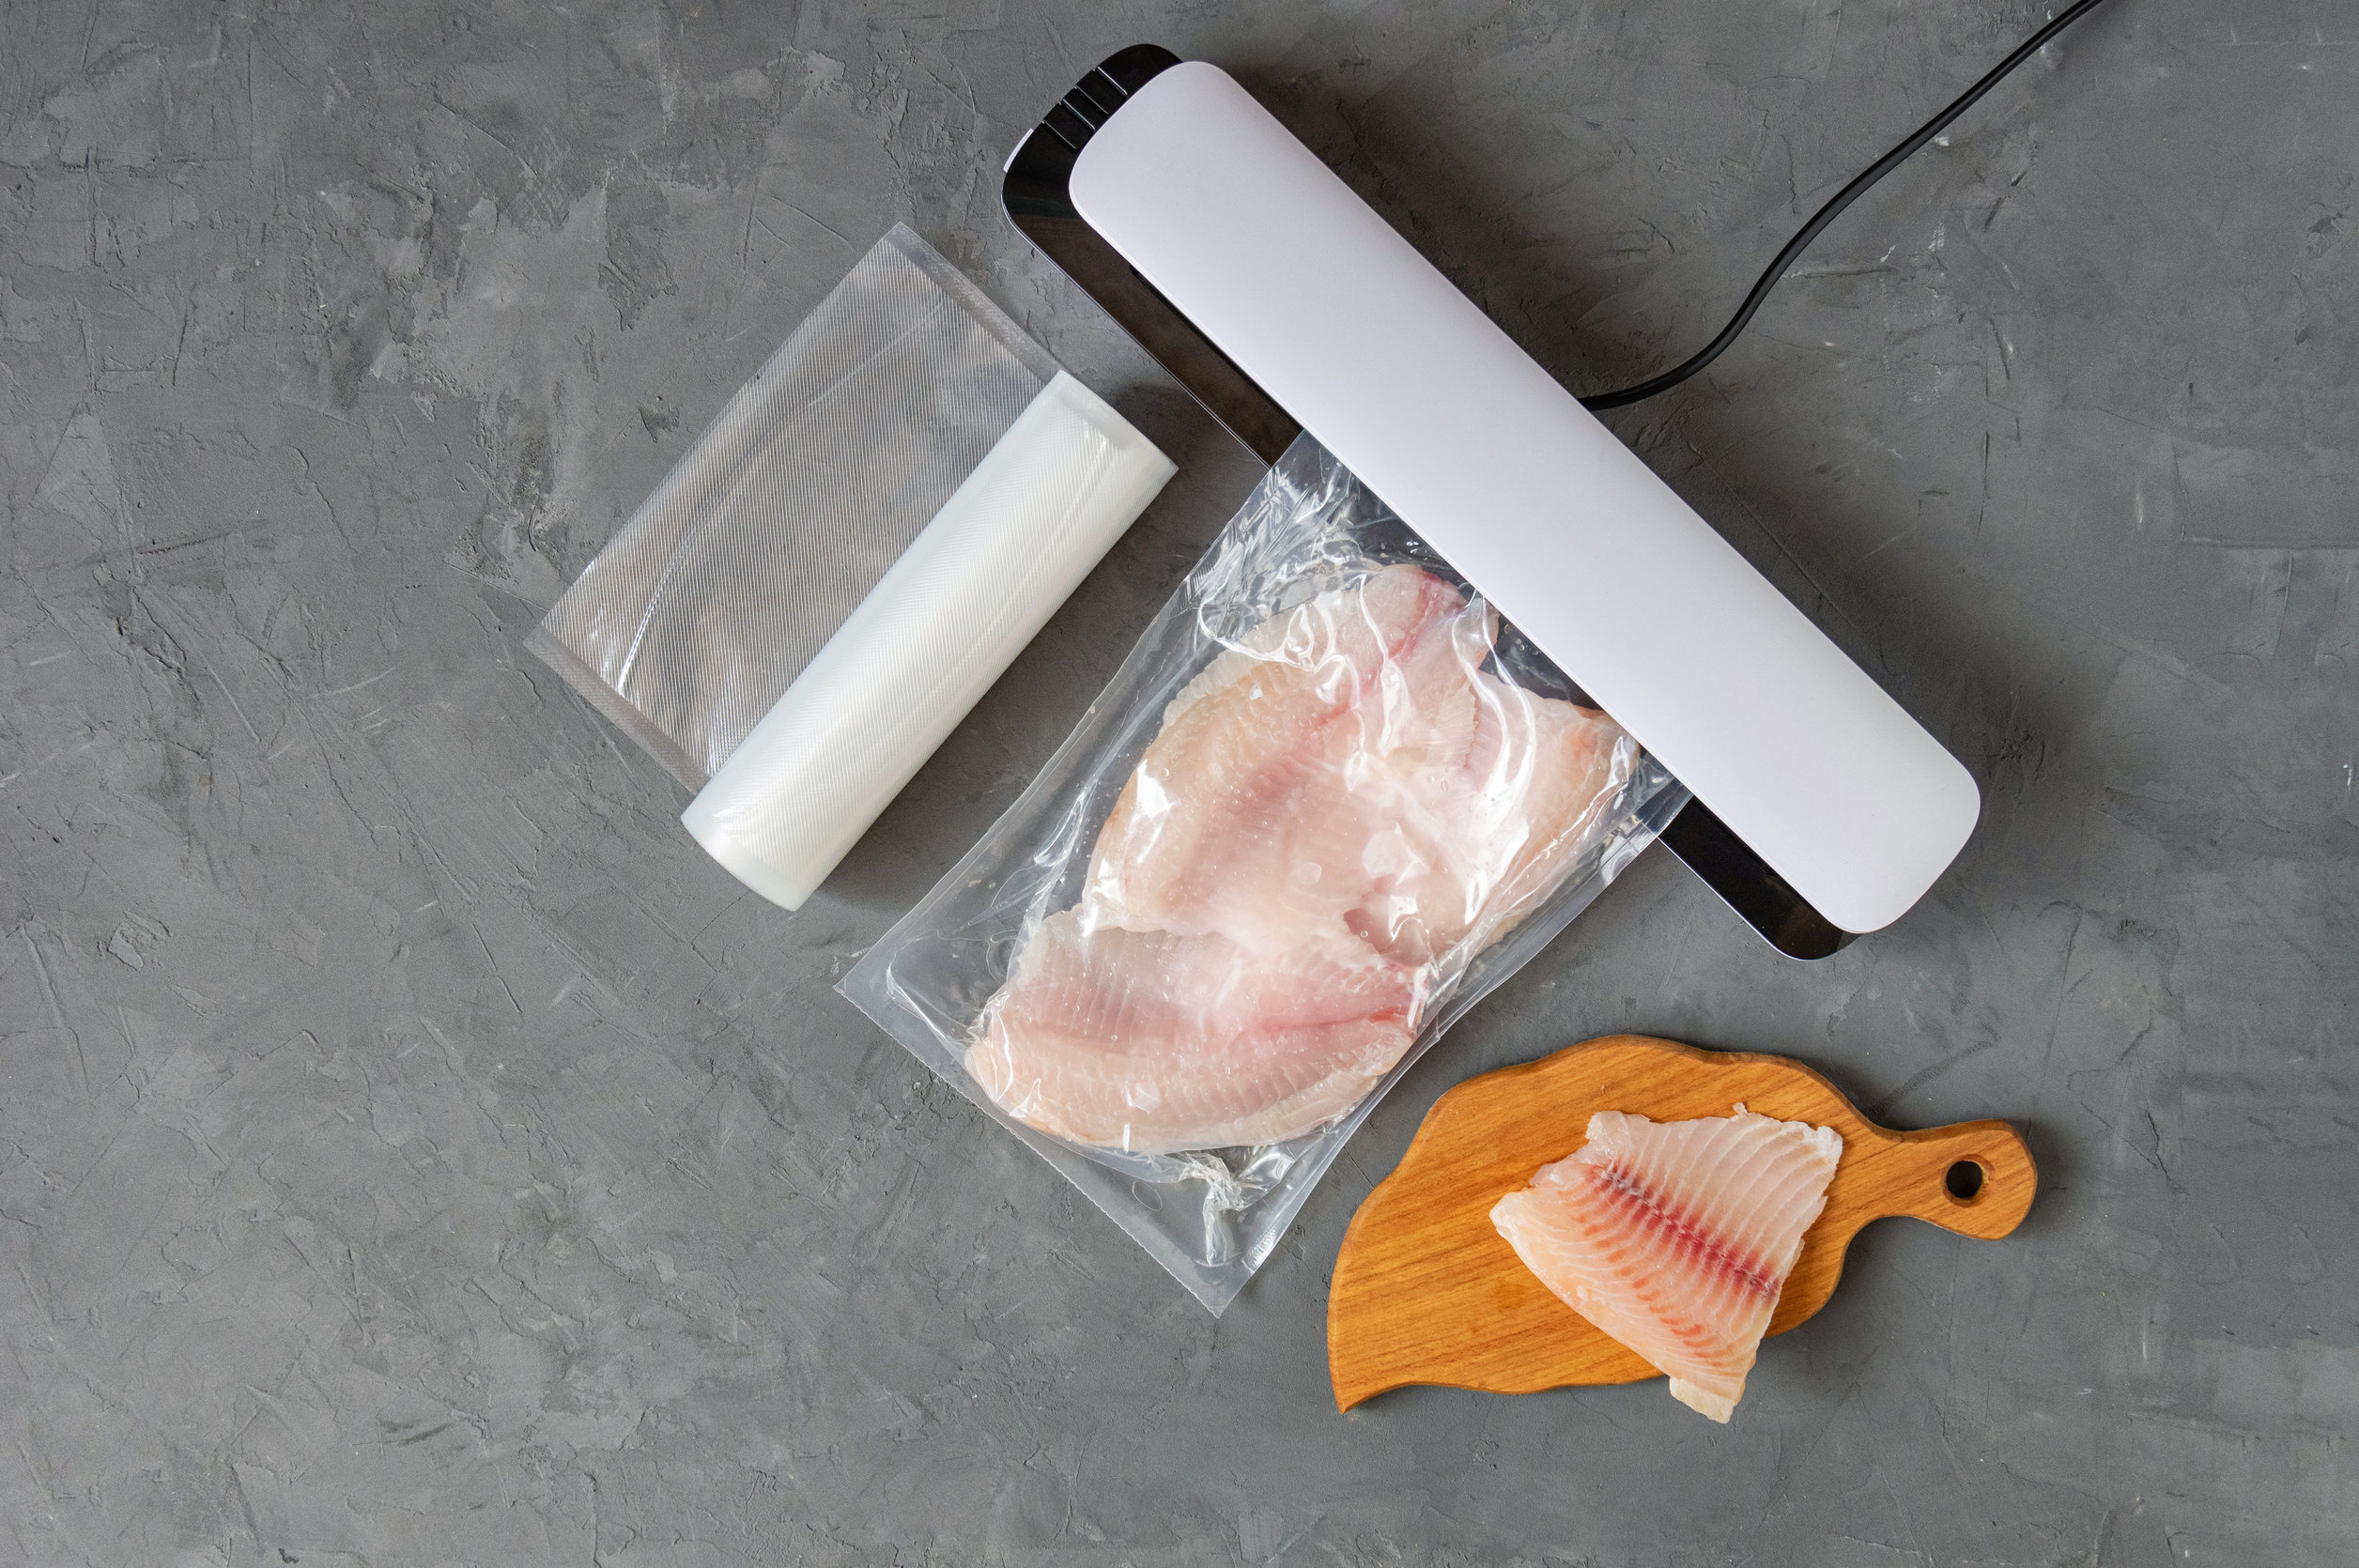 What Are the Best Commercial Vacuum Sealer Bags of 2022